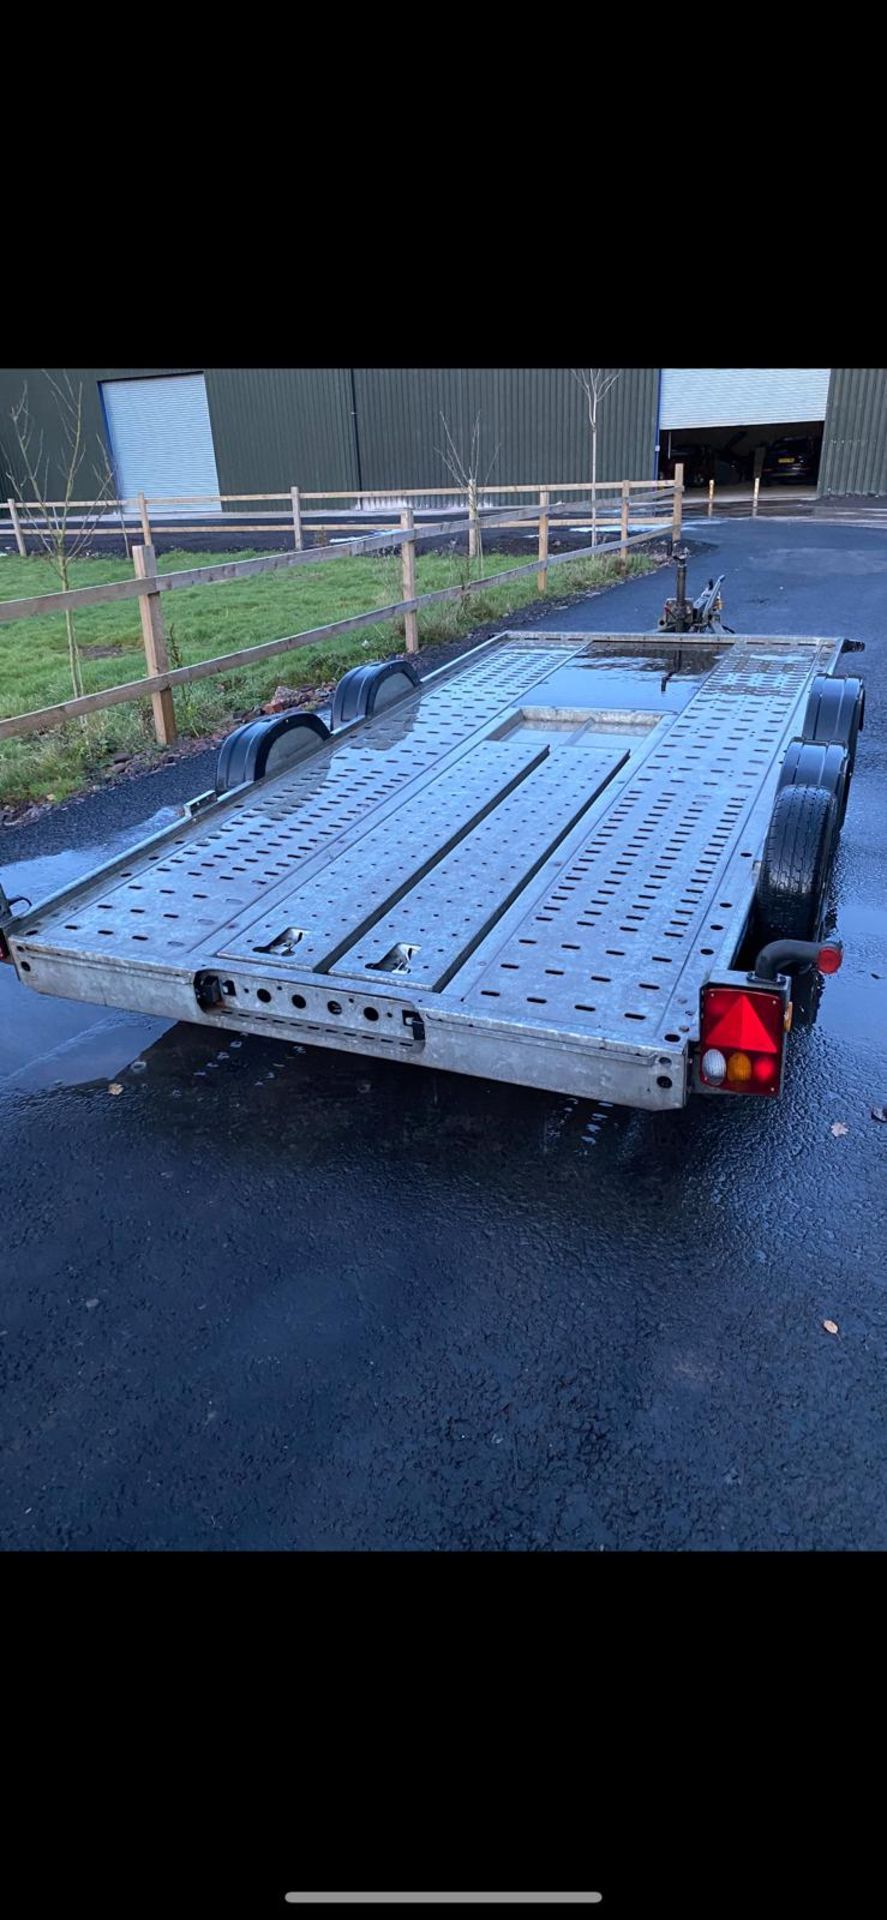 2019 BRIAN JAMES C4 BLUE CAR TRANSPORTER 4M BED LENGTH AND A 2600 KG GROSS CAPACITY *PLUS VAT* - Image 3 of 4